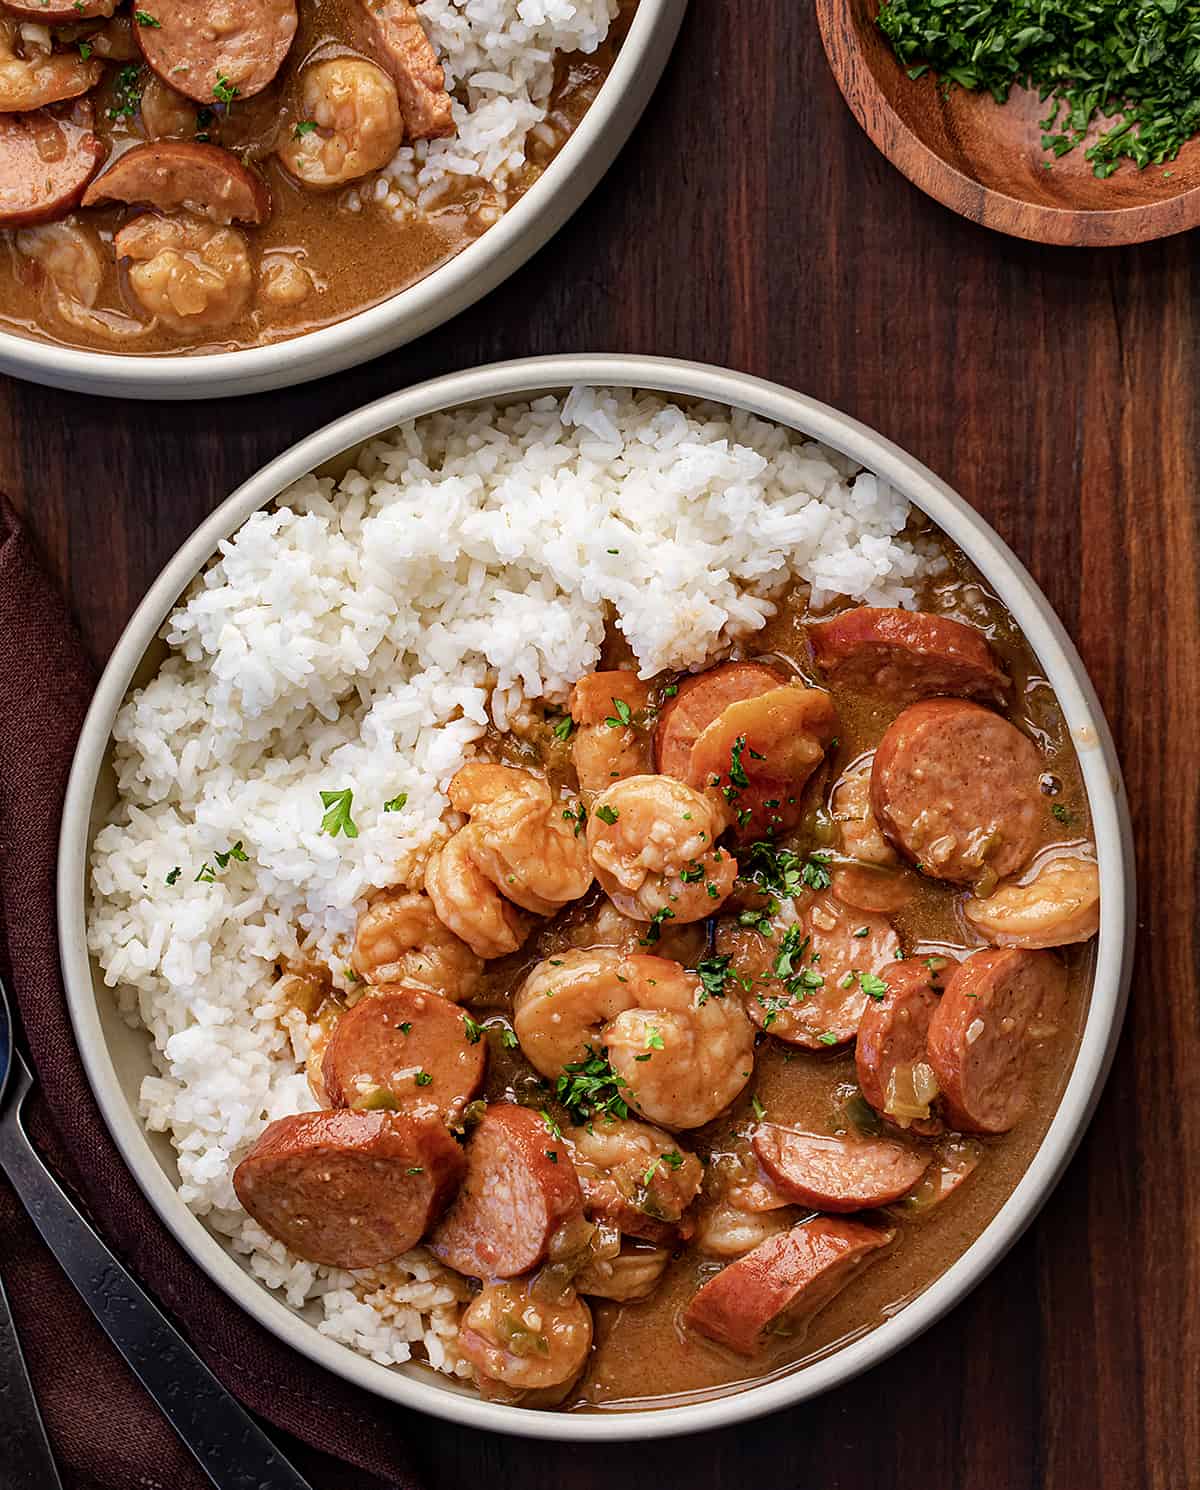 Bowls of Gumbo with Rice.